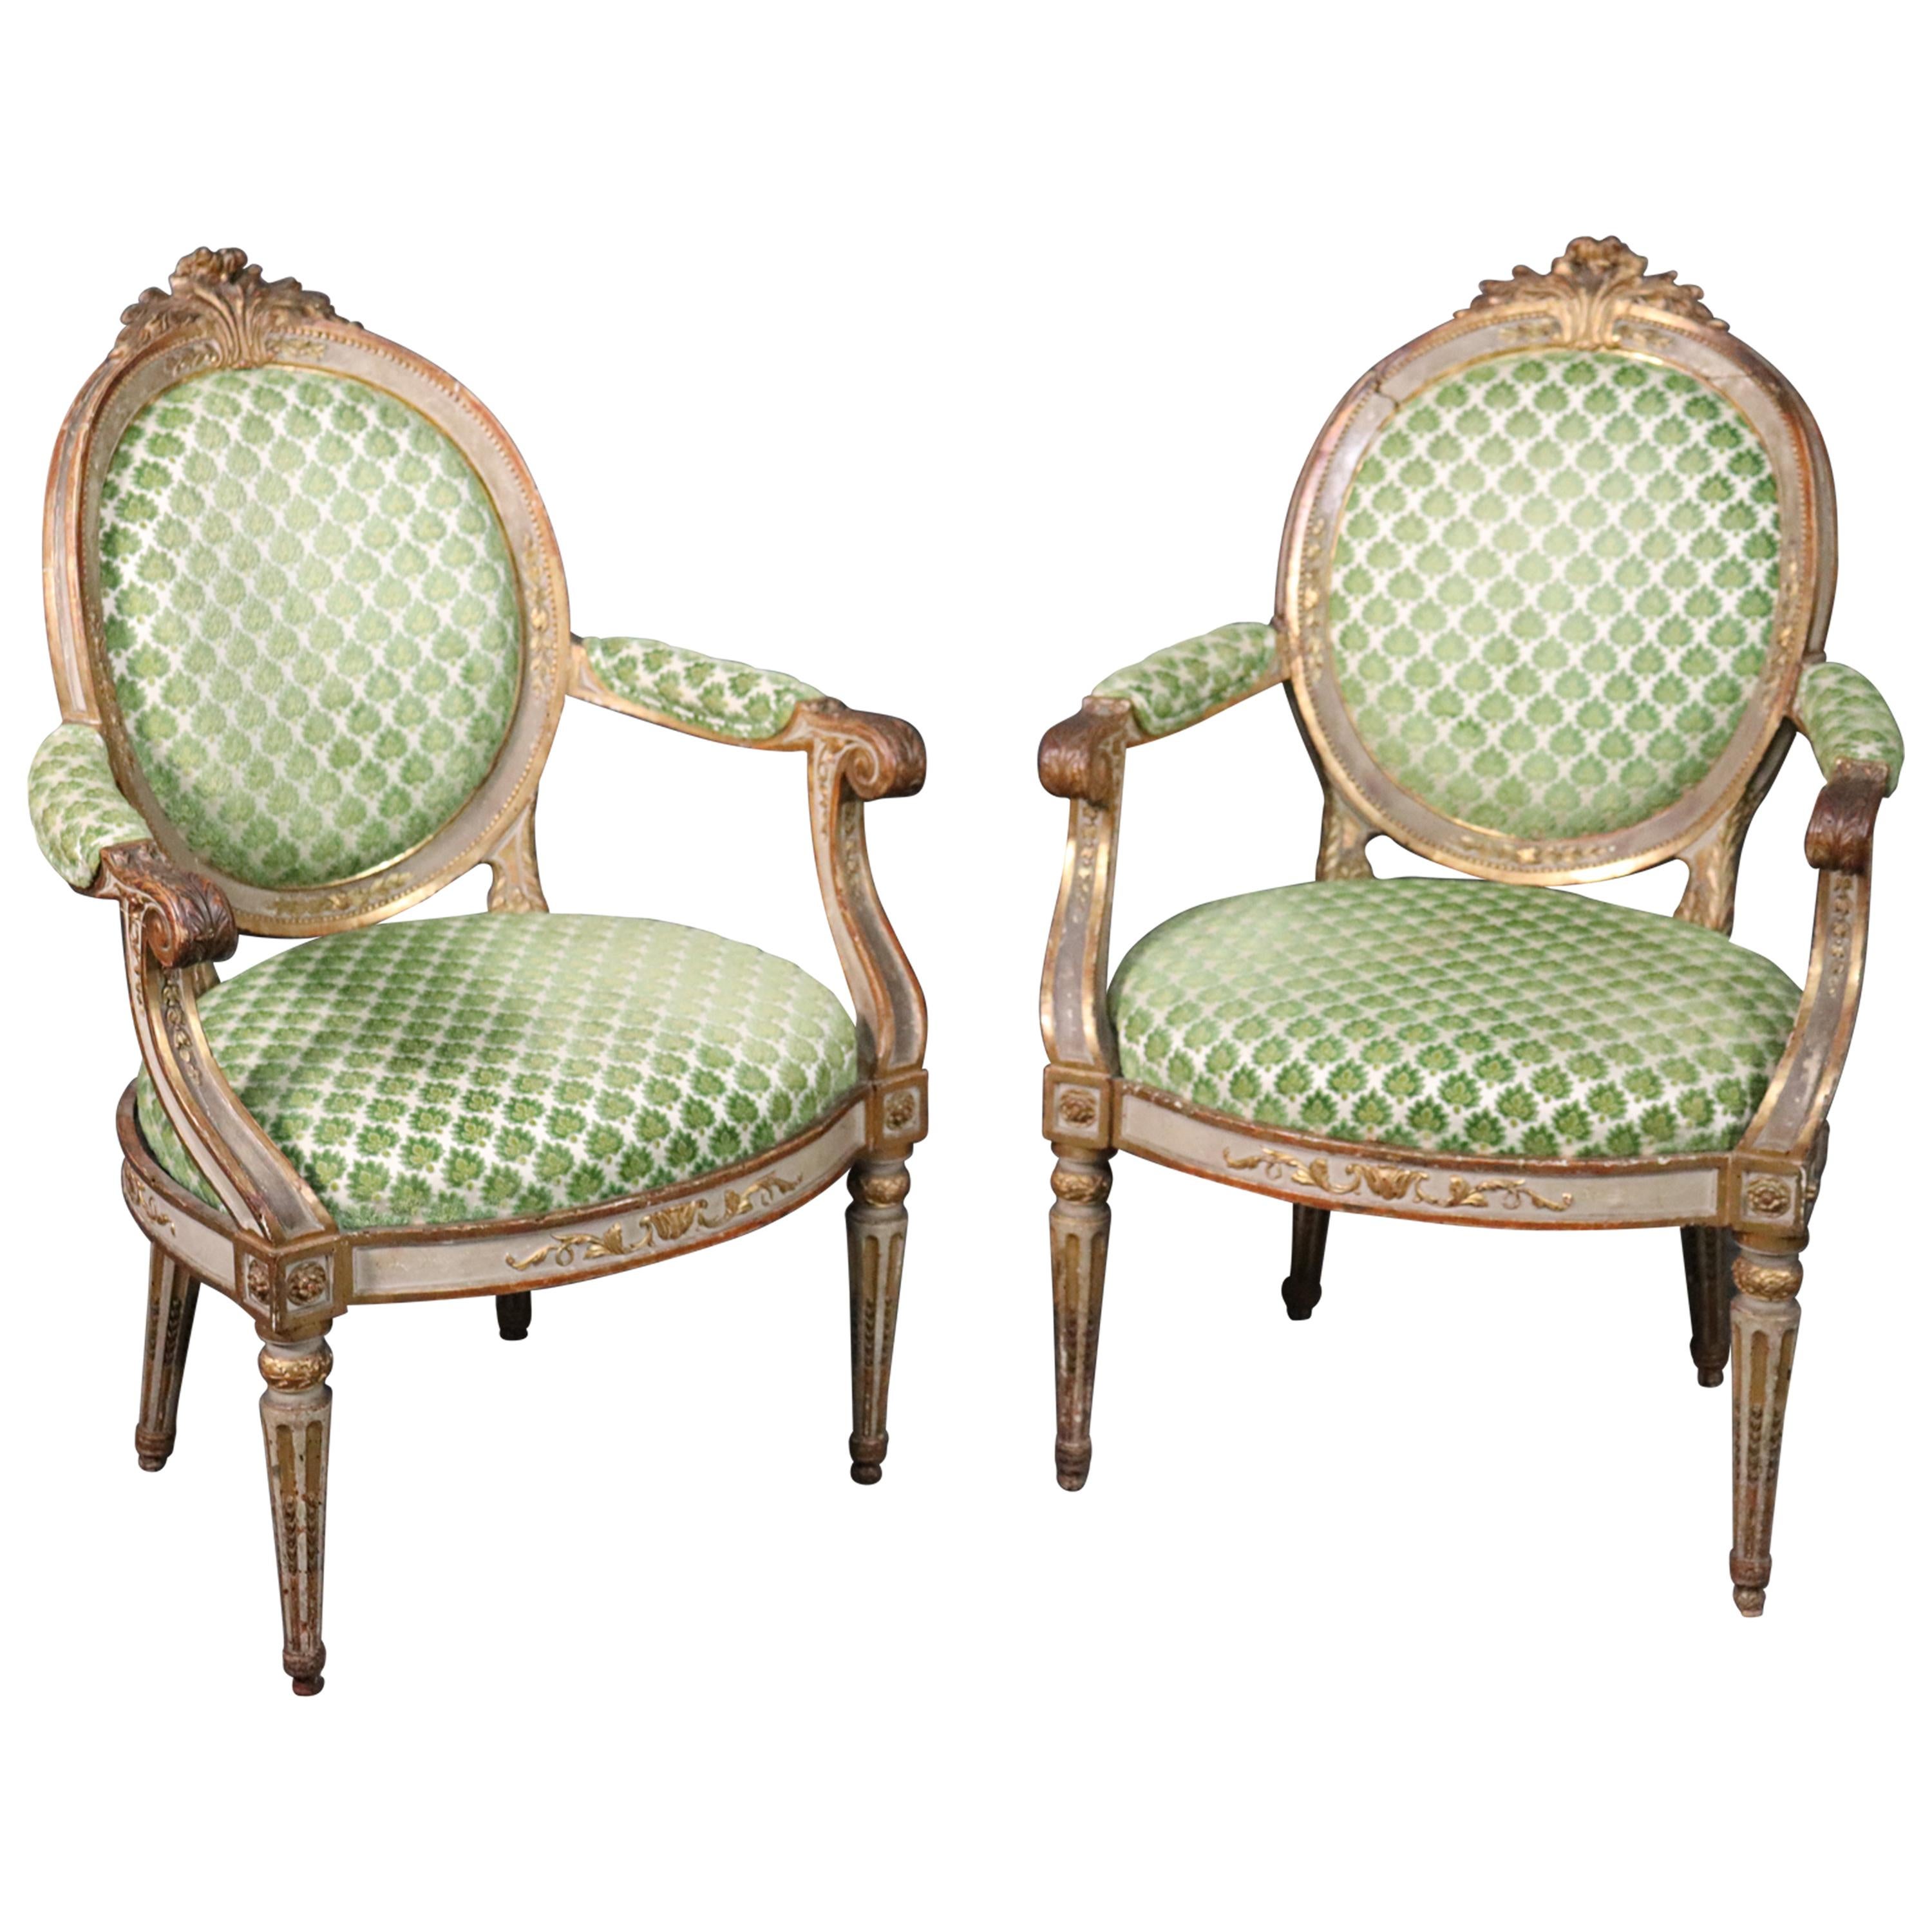 Period 1780s French Louis XVI Gilded and Painted Dining Armchairs Fauteuil, Pair